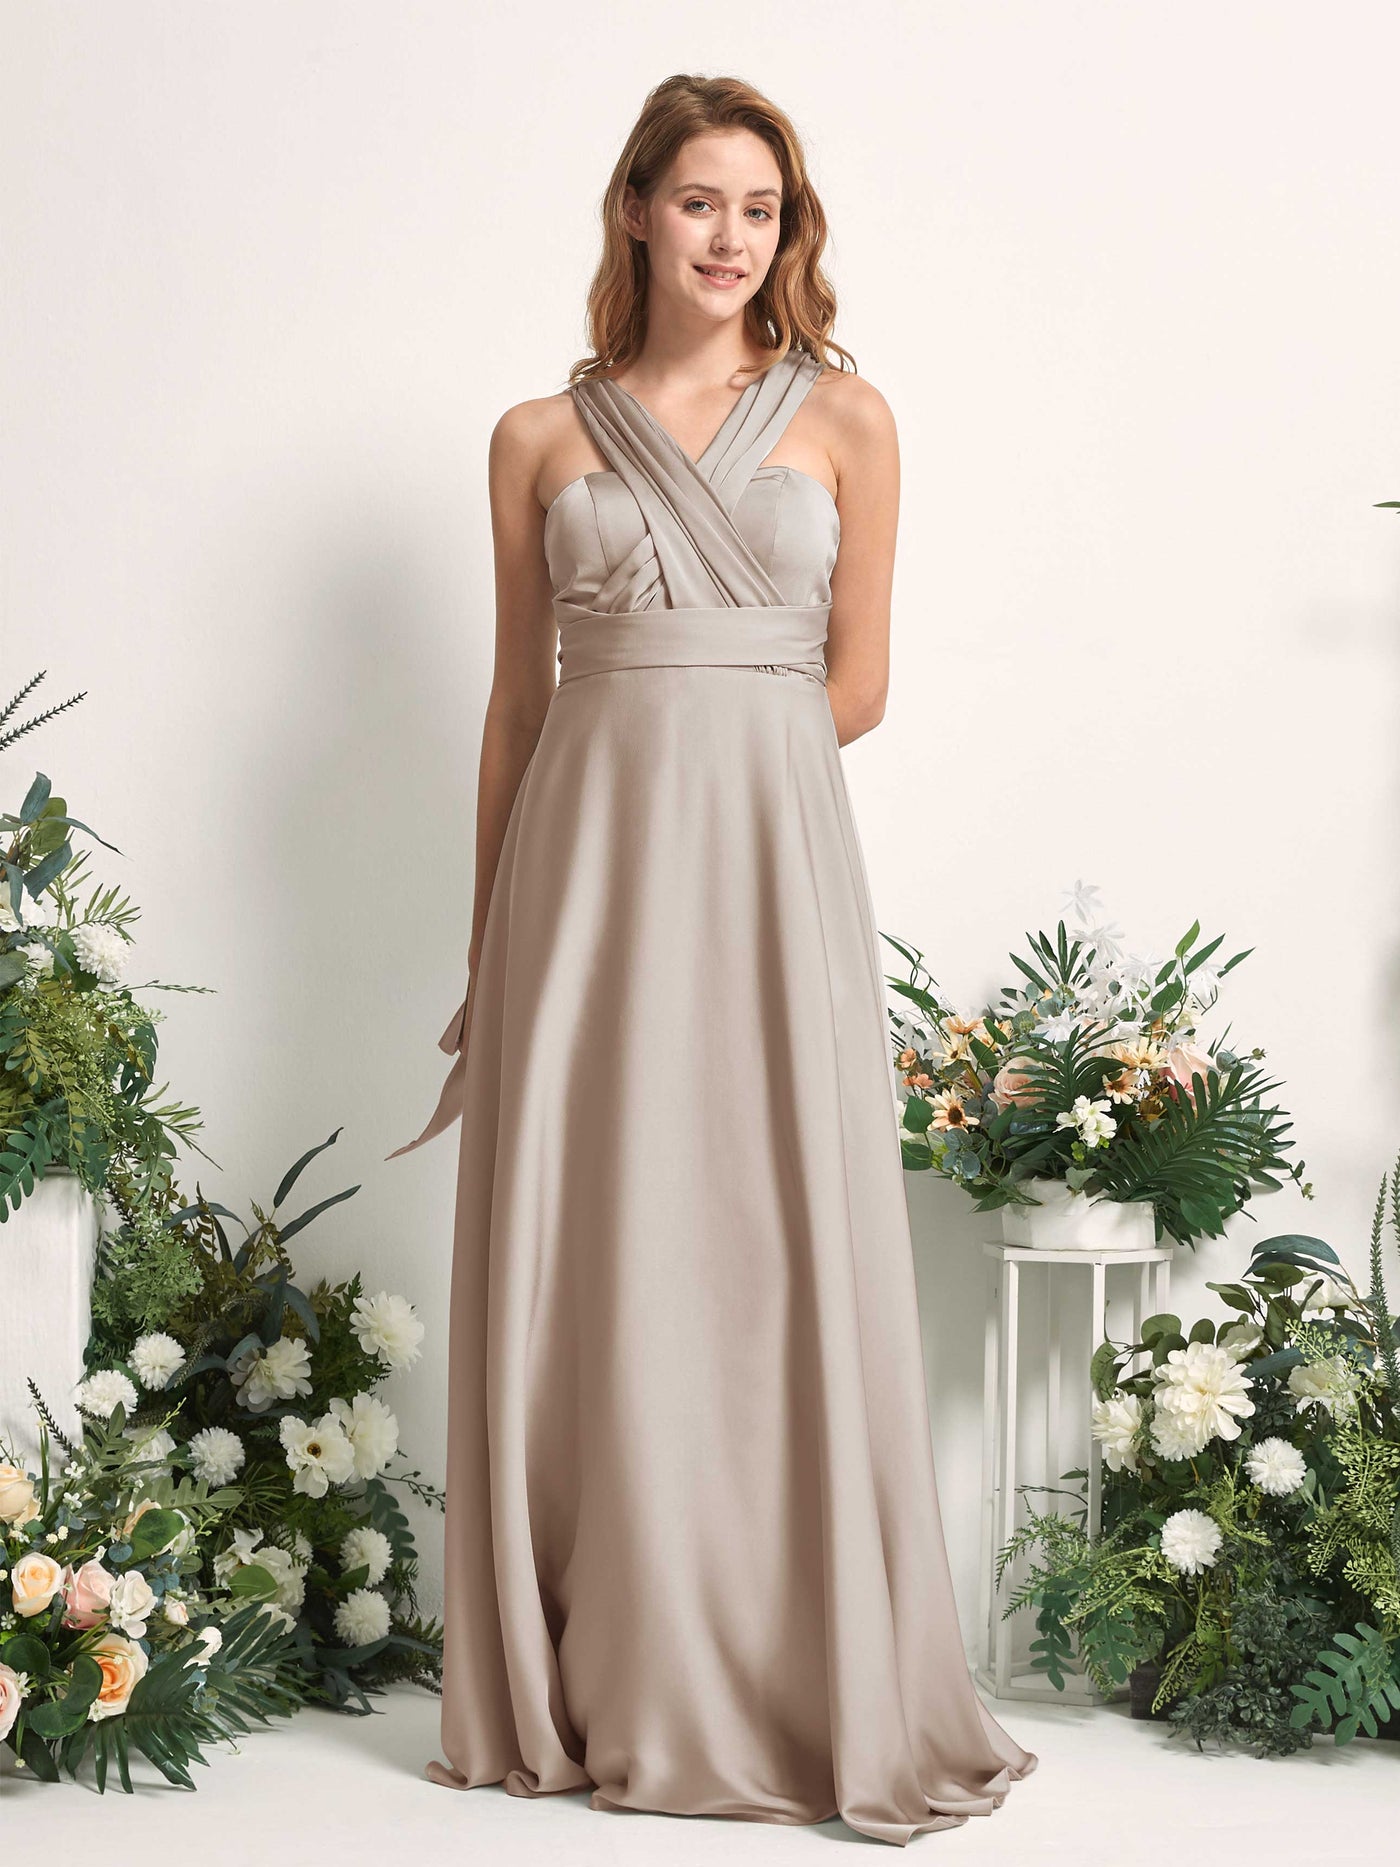 Taupe Bridesmaid Dresses Bridesmaid Dress A-line Satin Halter Full Length Short Sleeves Wedding Party Dress (81226402)#color_taupe